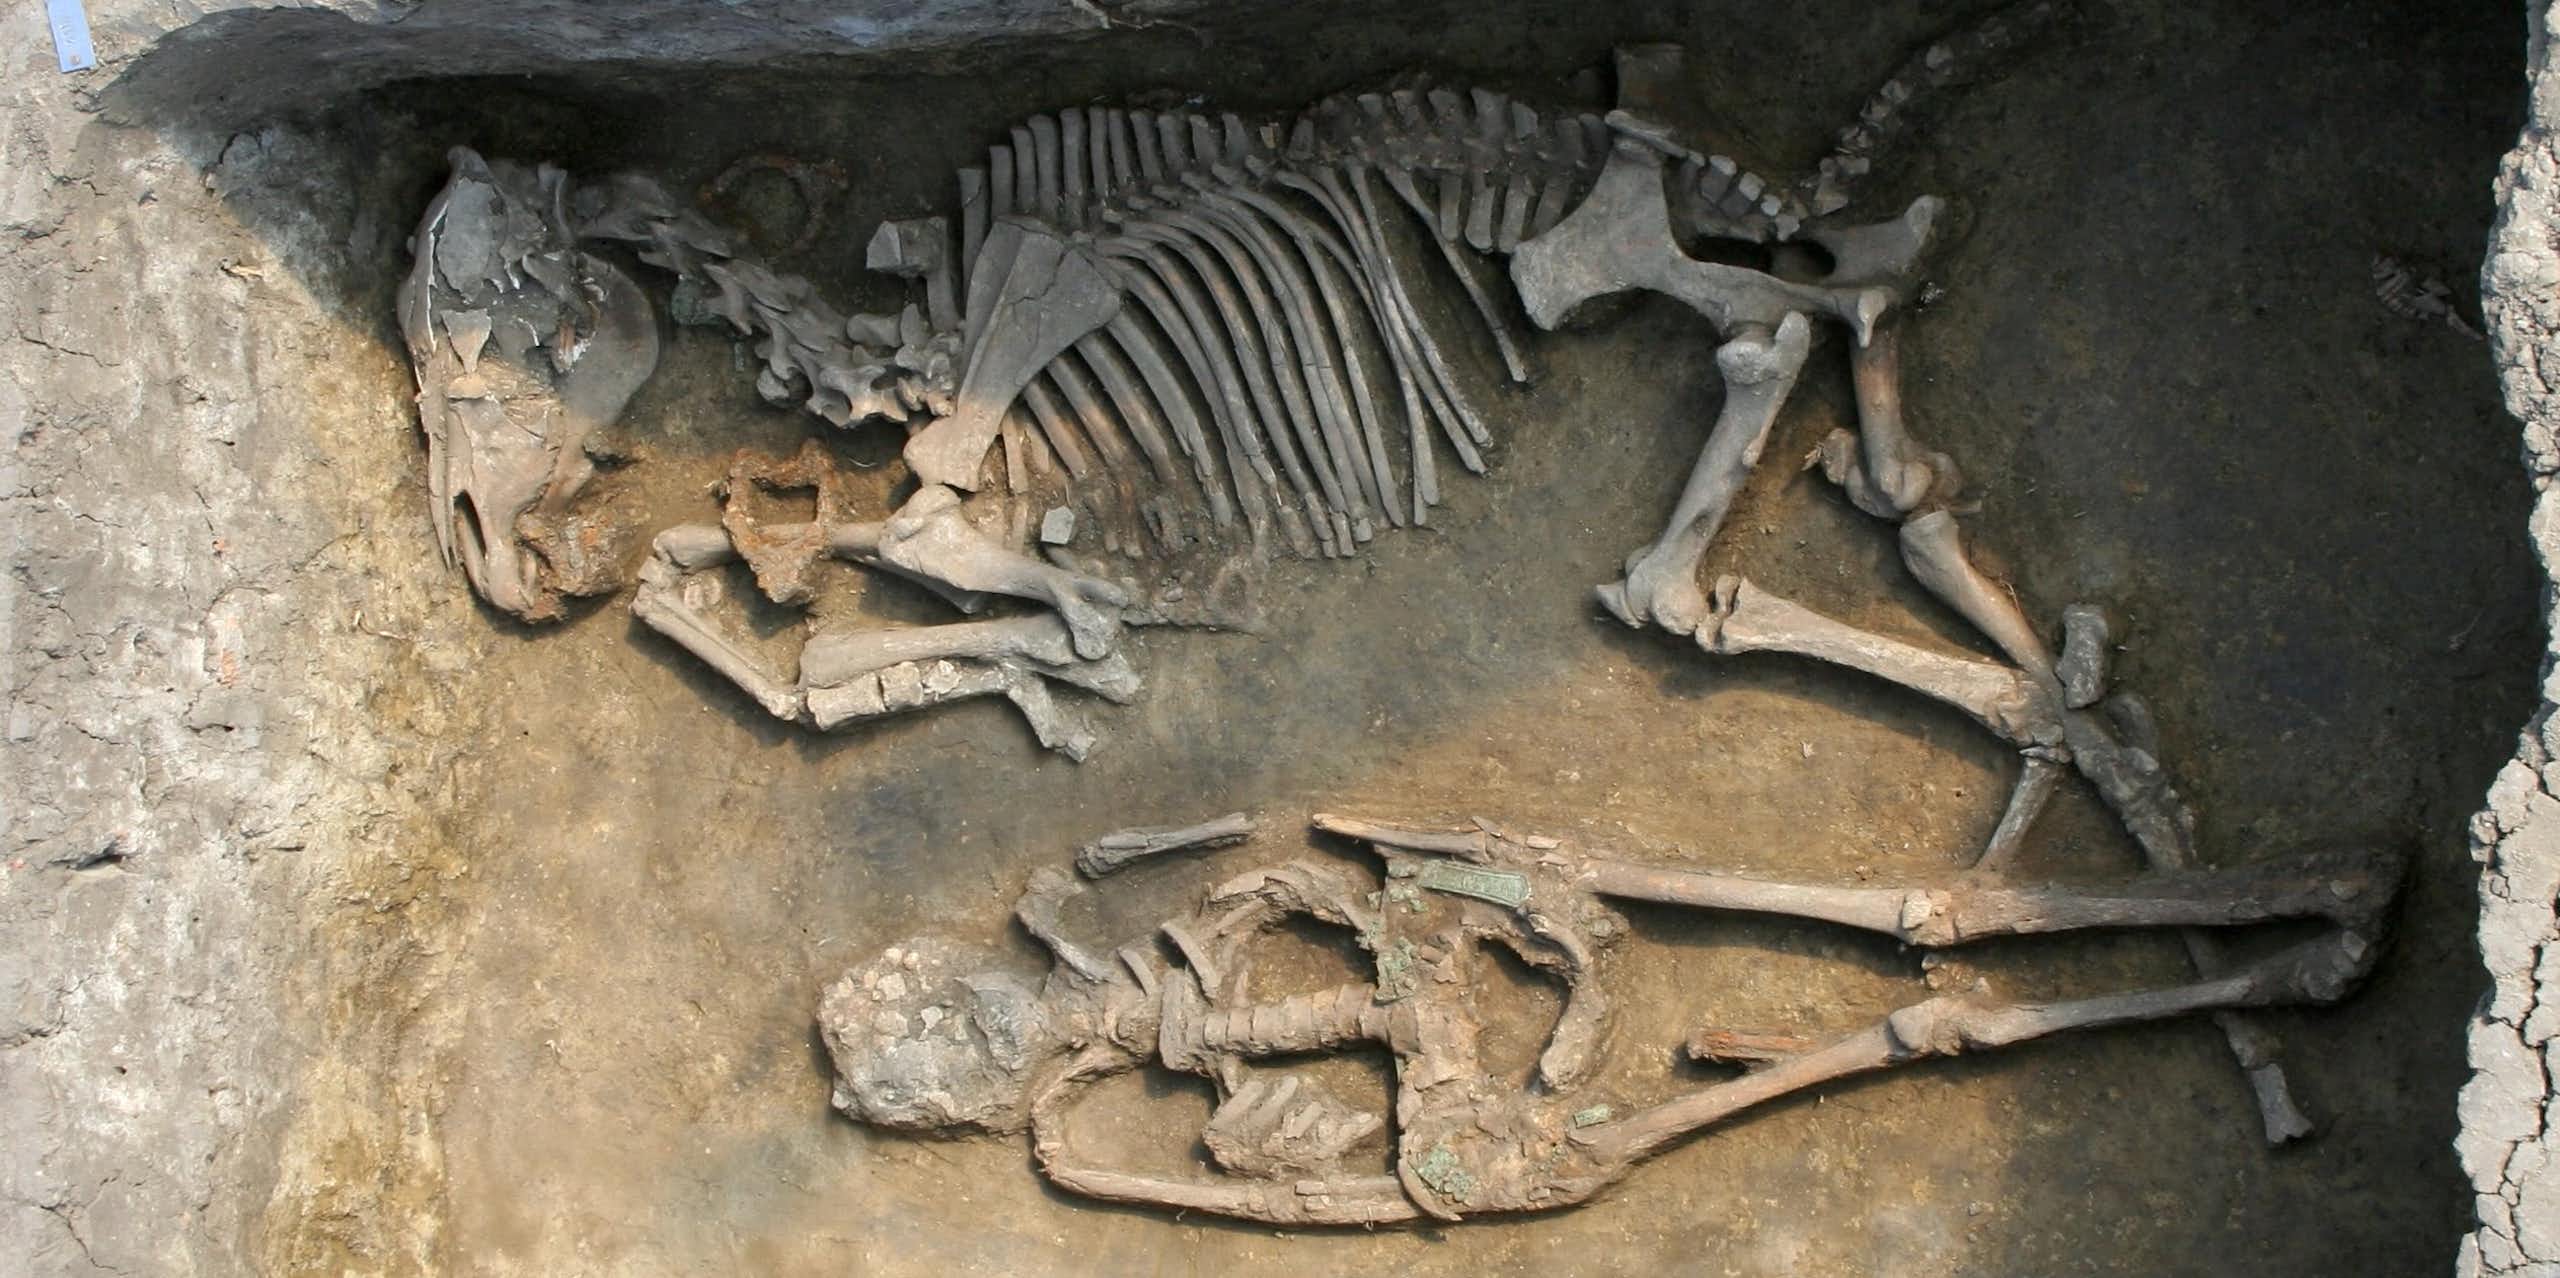 Photo of an excavated grave containing the skeletons of a person and a horse.